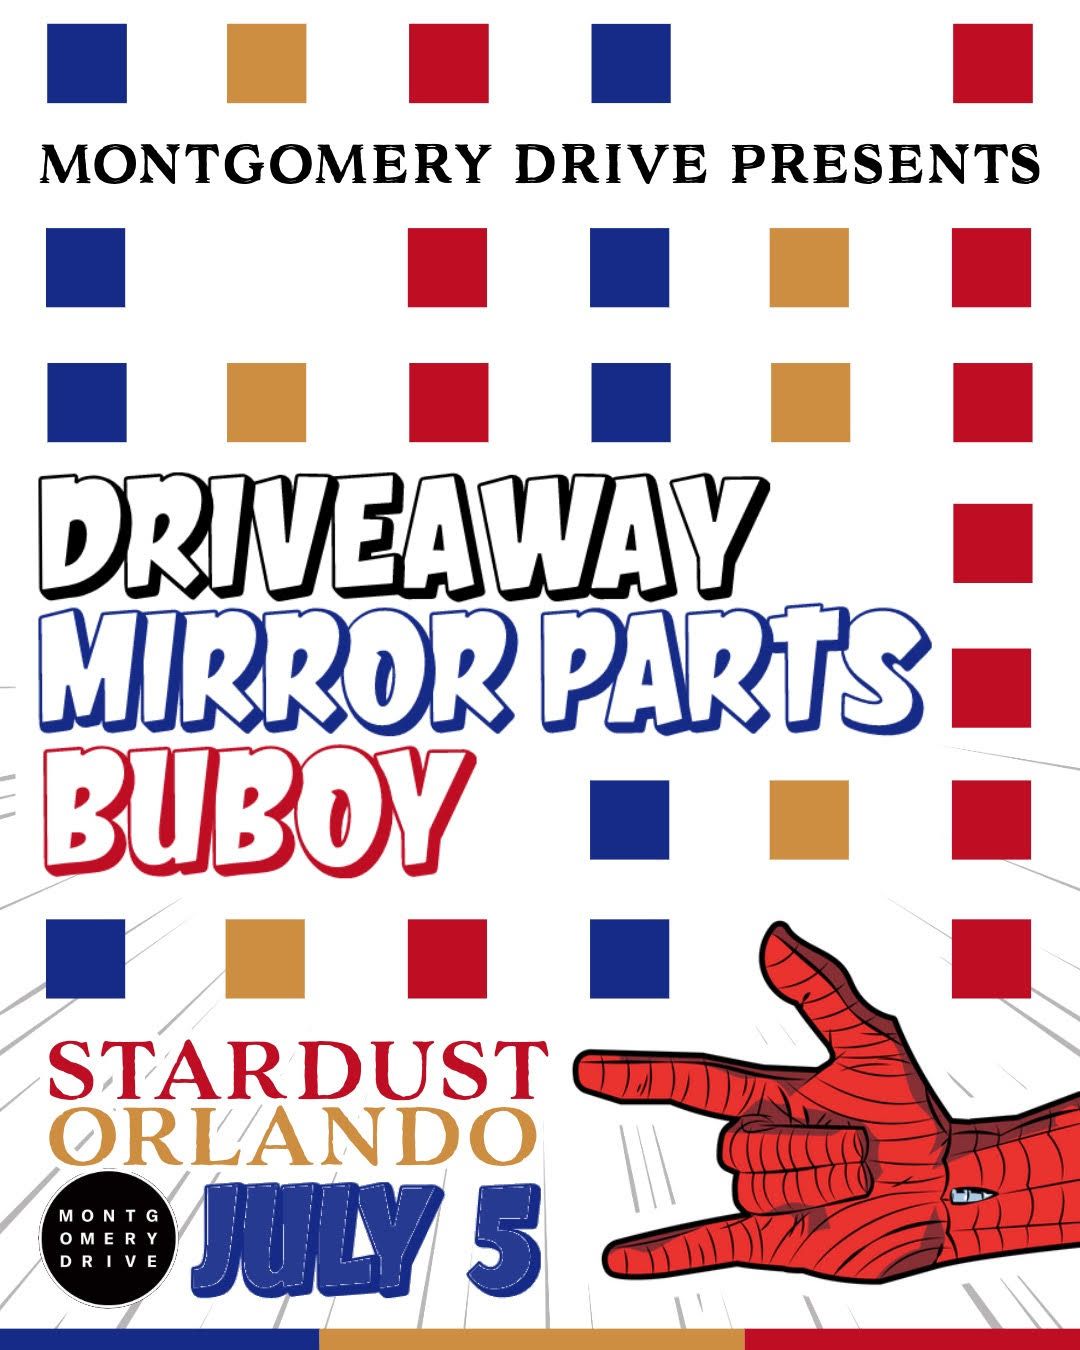 Driveaway with Mirror Parts and Buboy at Stardust Video & Coffee - Orlando, FL